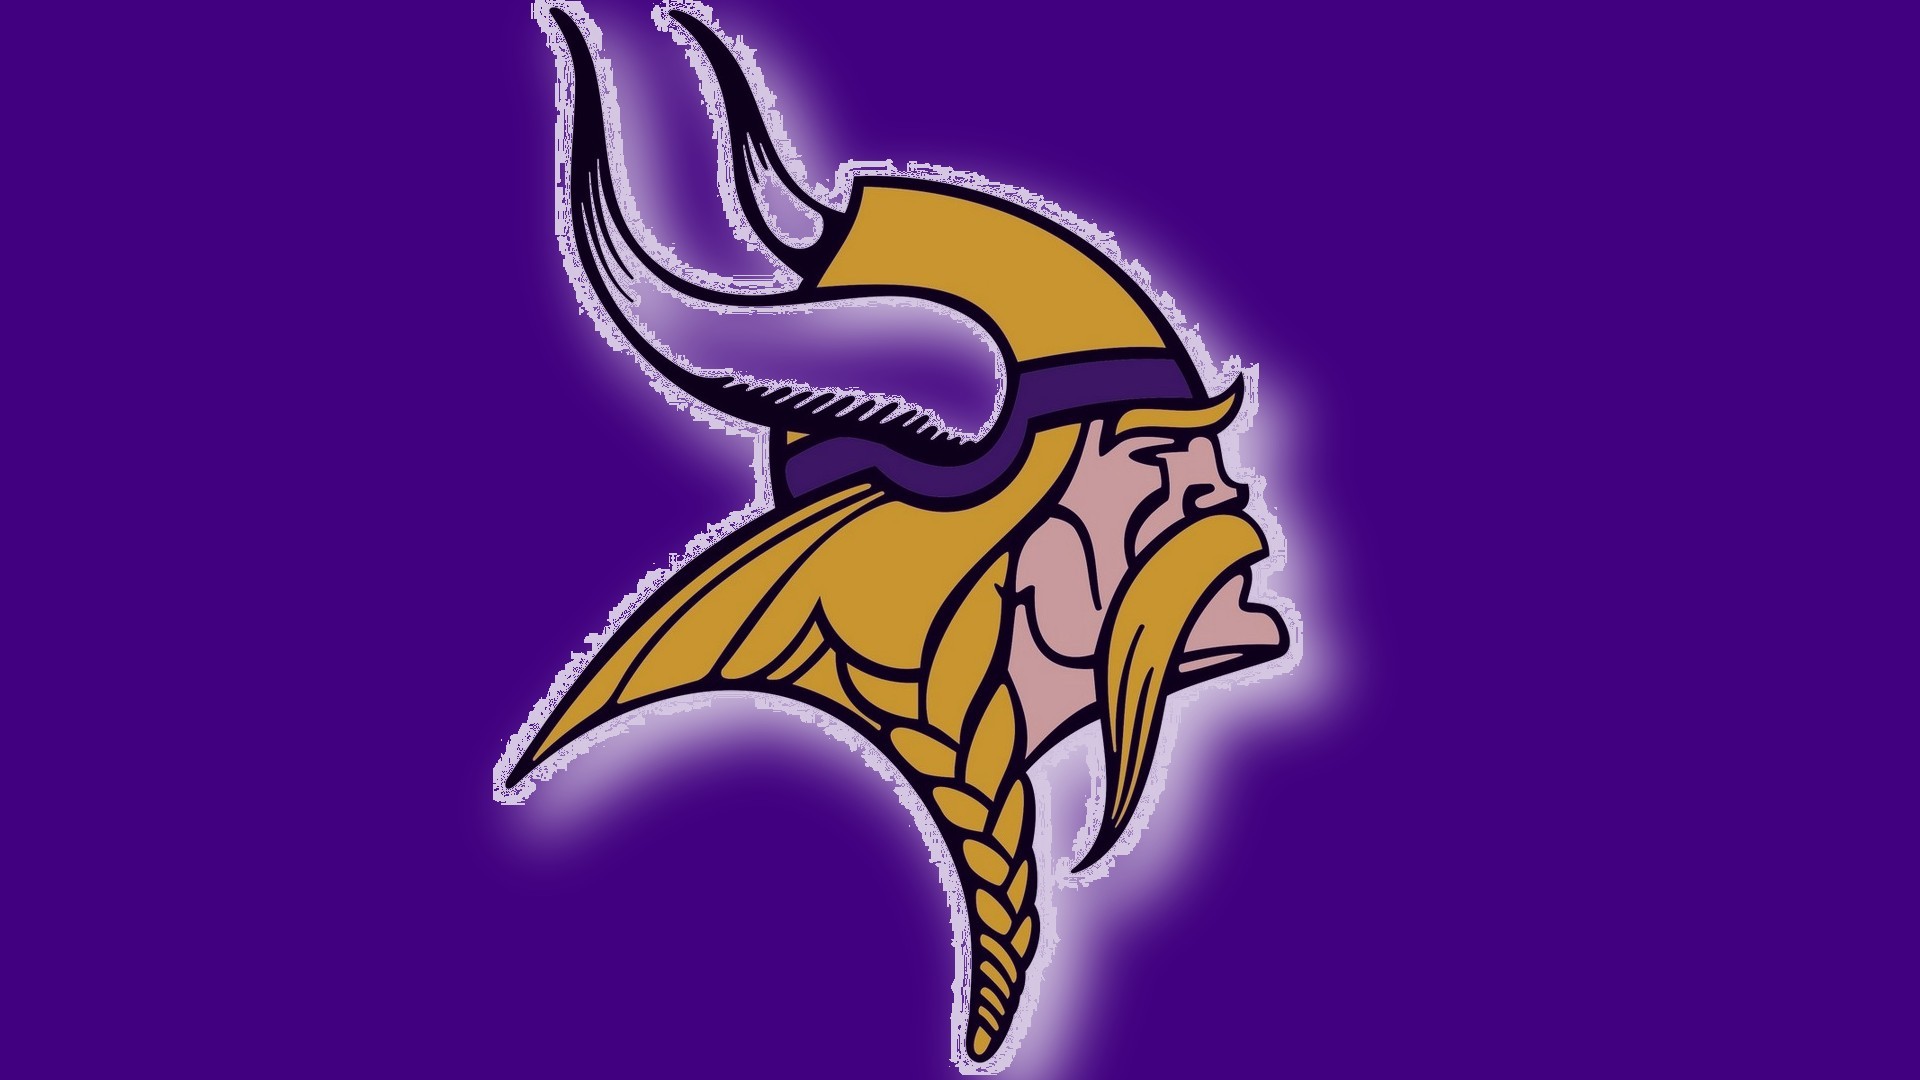 HD Minnesota Vikings Wallpapers with resolution 1920x1080 pixel. You can make this wallpaper for your Mac or Windows Desktop Background, iPhone, Android or Tablet and another Smartphone device